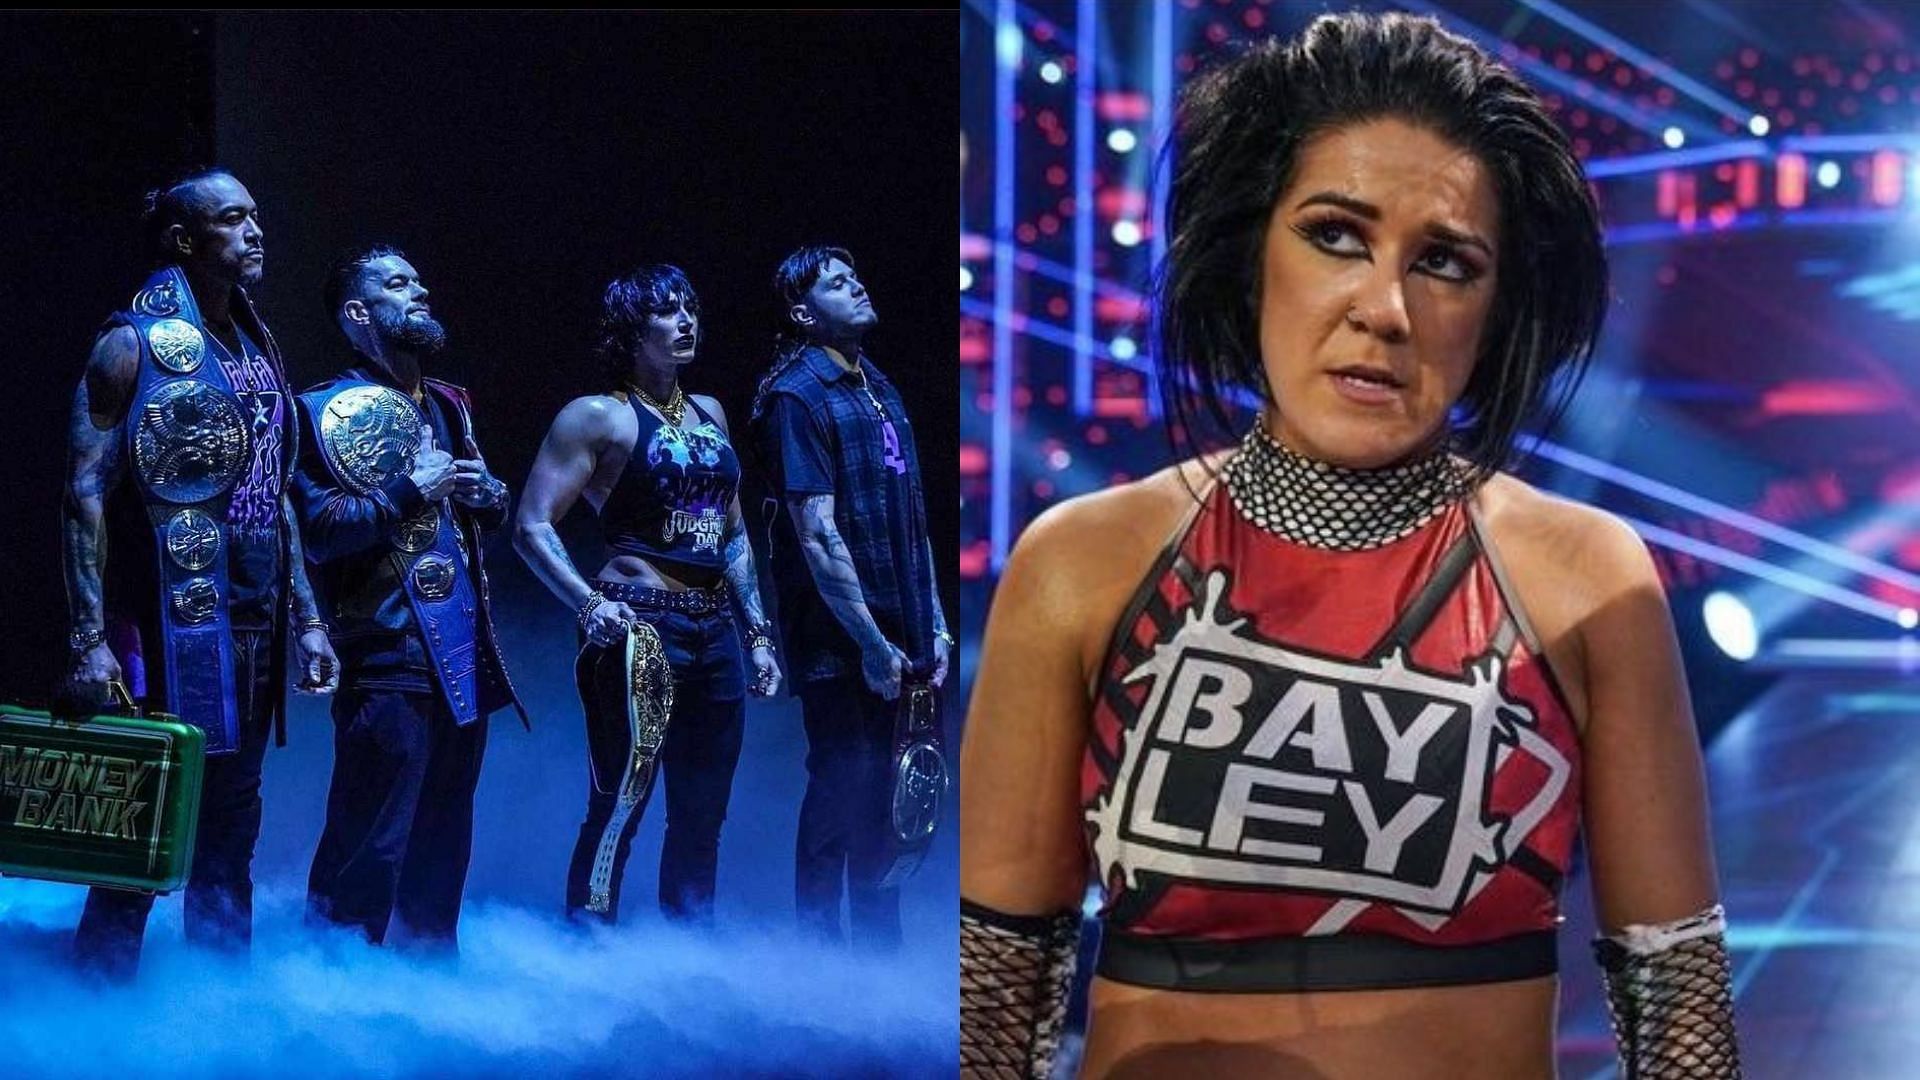 Bayley sent a message aimed at WWE